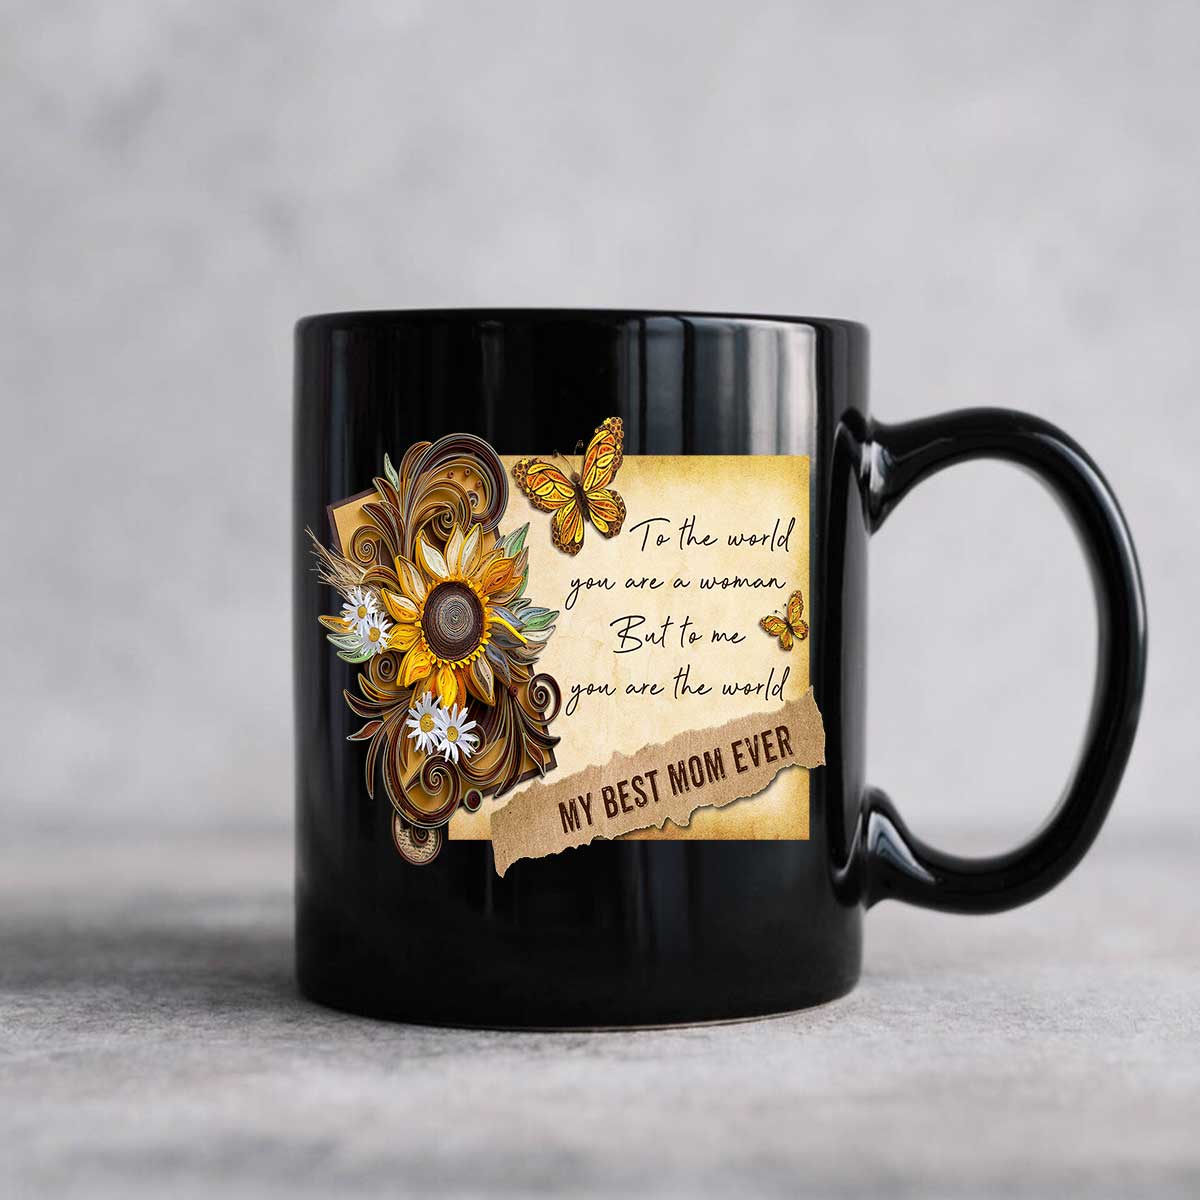 Gift For Mom Mug - Daughter to mom, Beautiful letter, Pretty butterfly Mug - Gift For Mother's Day, Presents for Mom - My best mom ever Mug